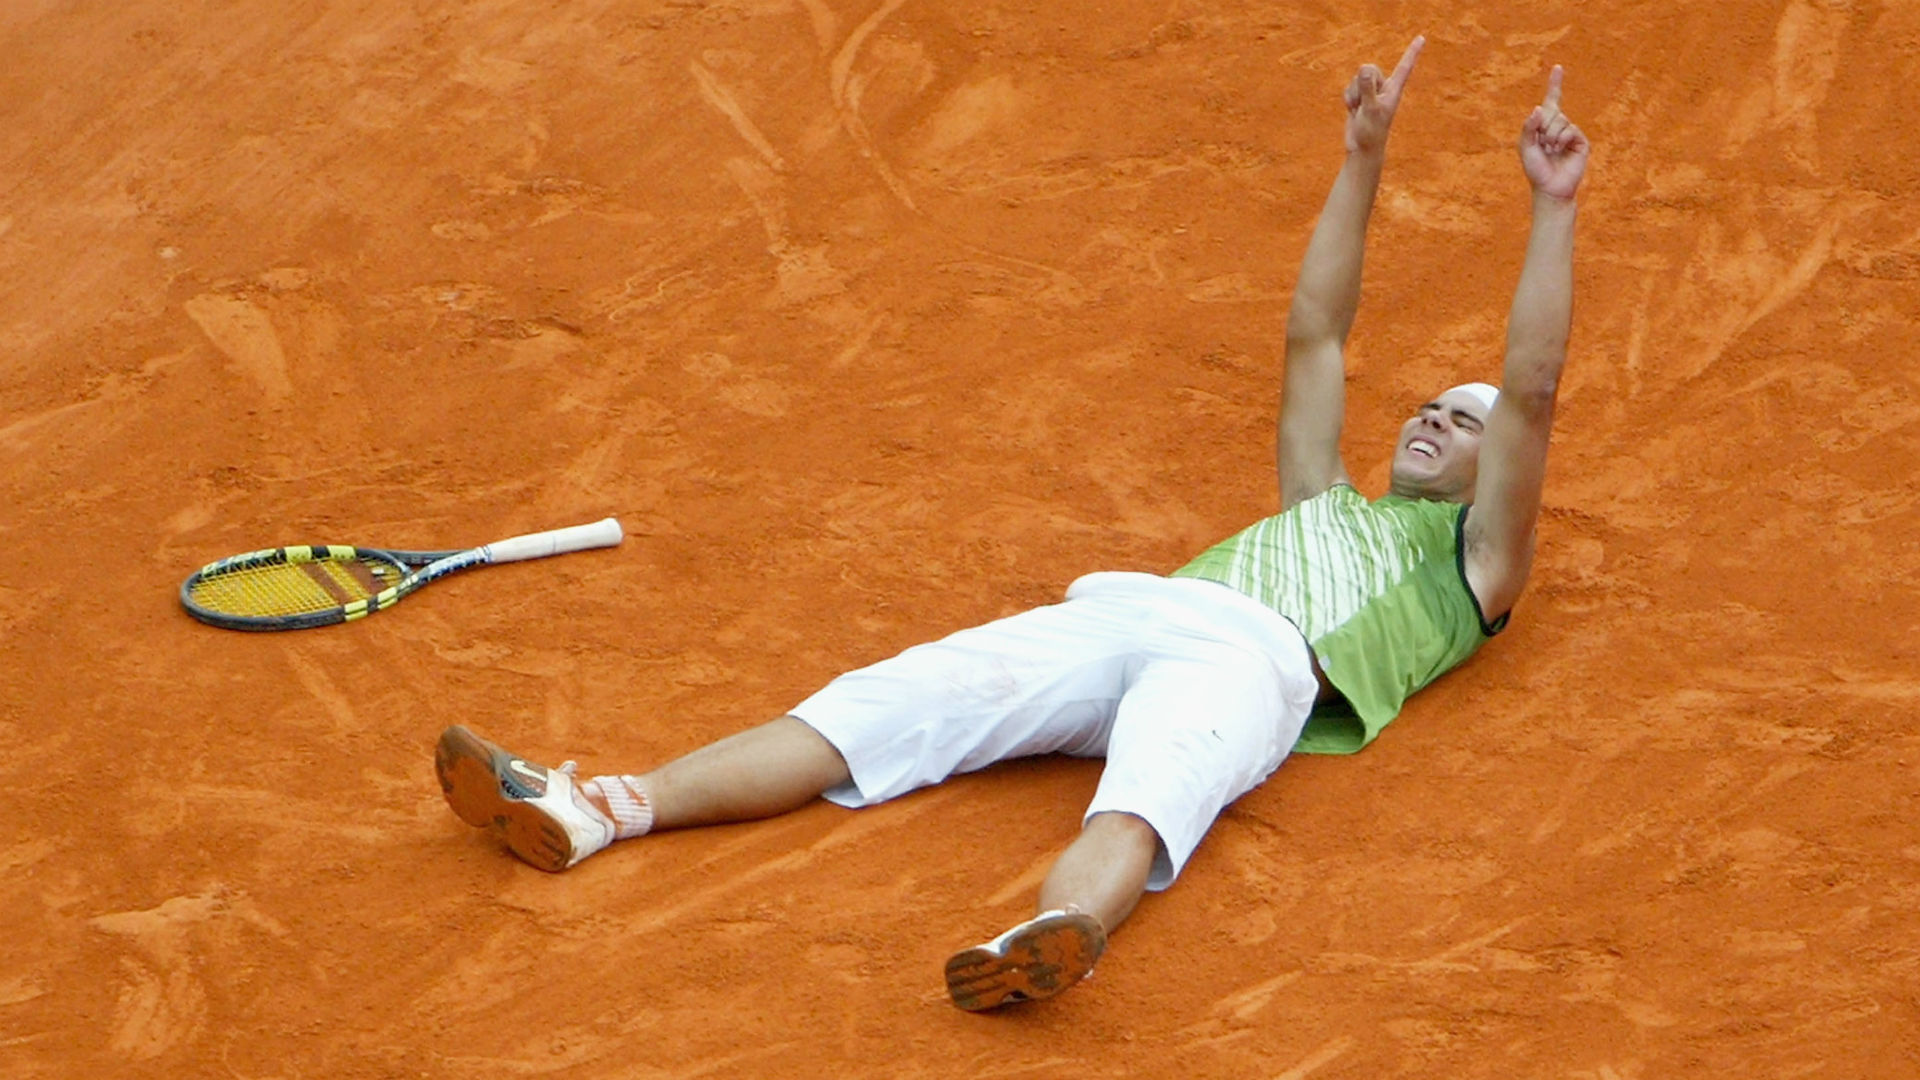 The French Open has been won by Rafael Nadal, Novak Djokovic and Francesca Schiavone on this day in previous years.